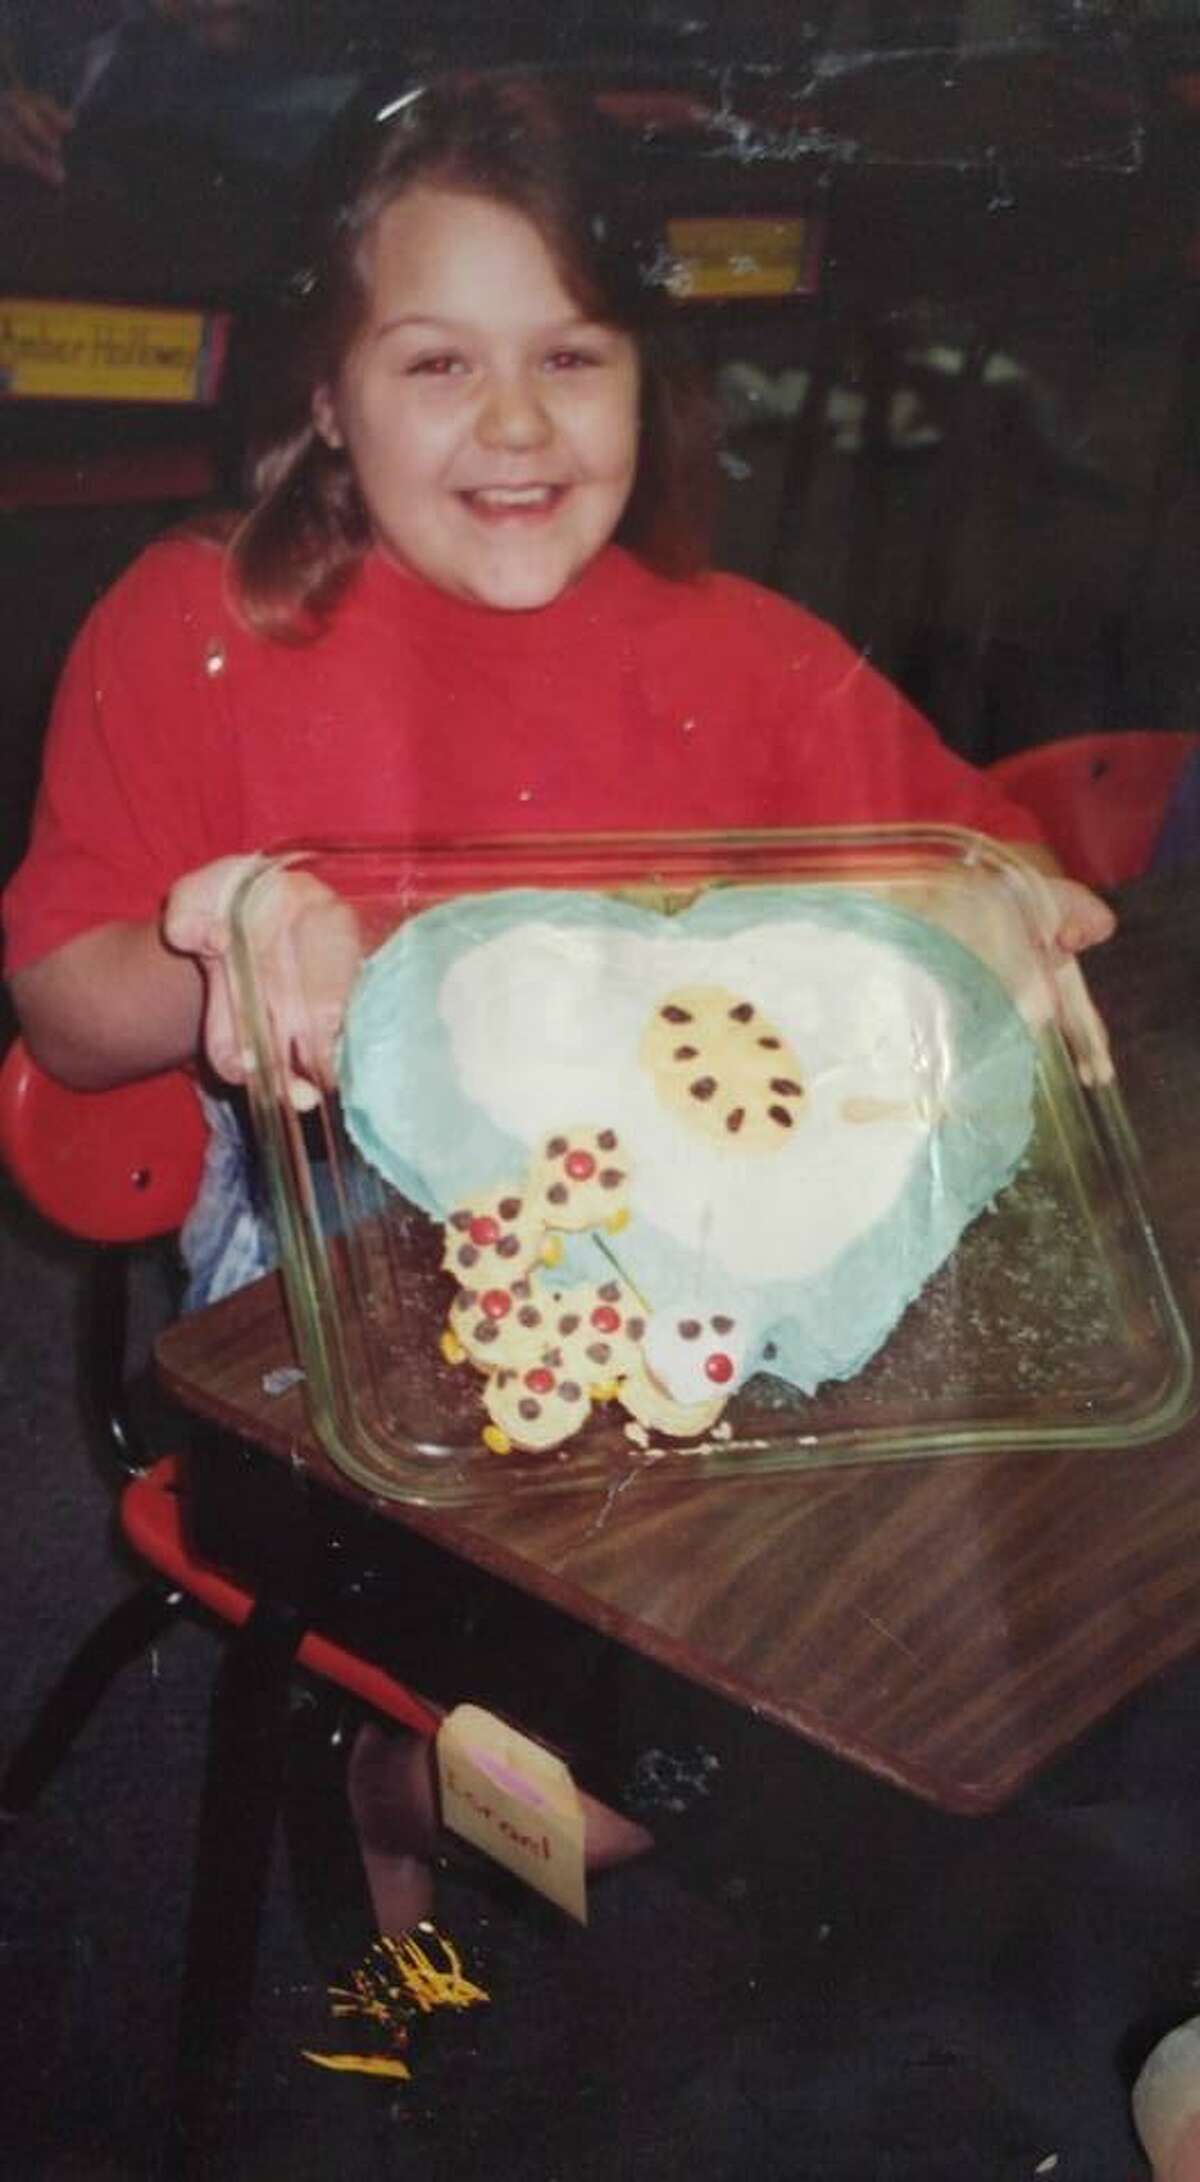 Jennie Reid Elementary School counselor Danielle Knight has deep roots in La Porte ISD. This photo shows her as a third-grader at Lomax Elementary School in the 1993-94 school year. Her mother helped her bake this cake to take to her teacher, Stephanie Chamblee.